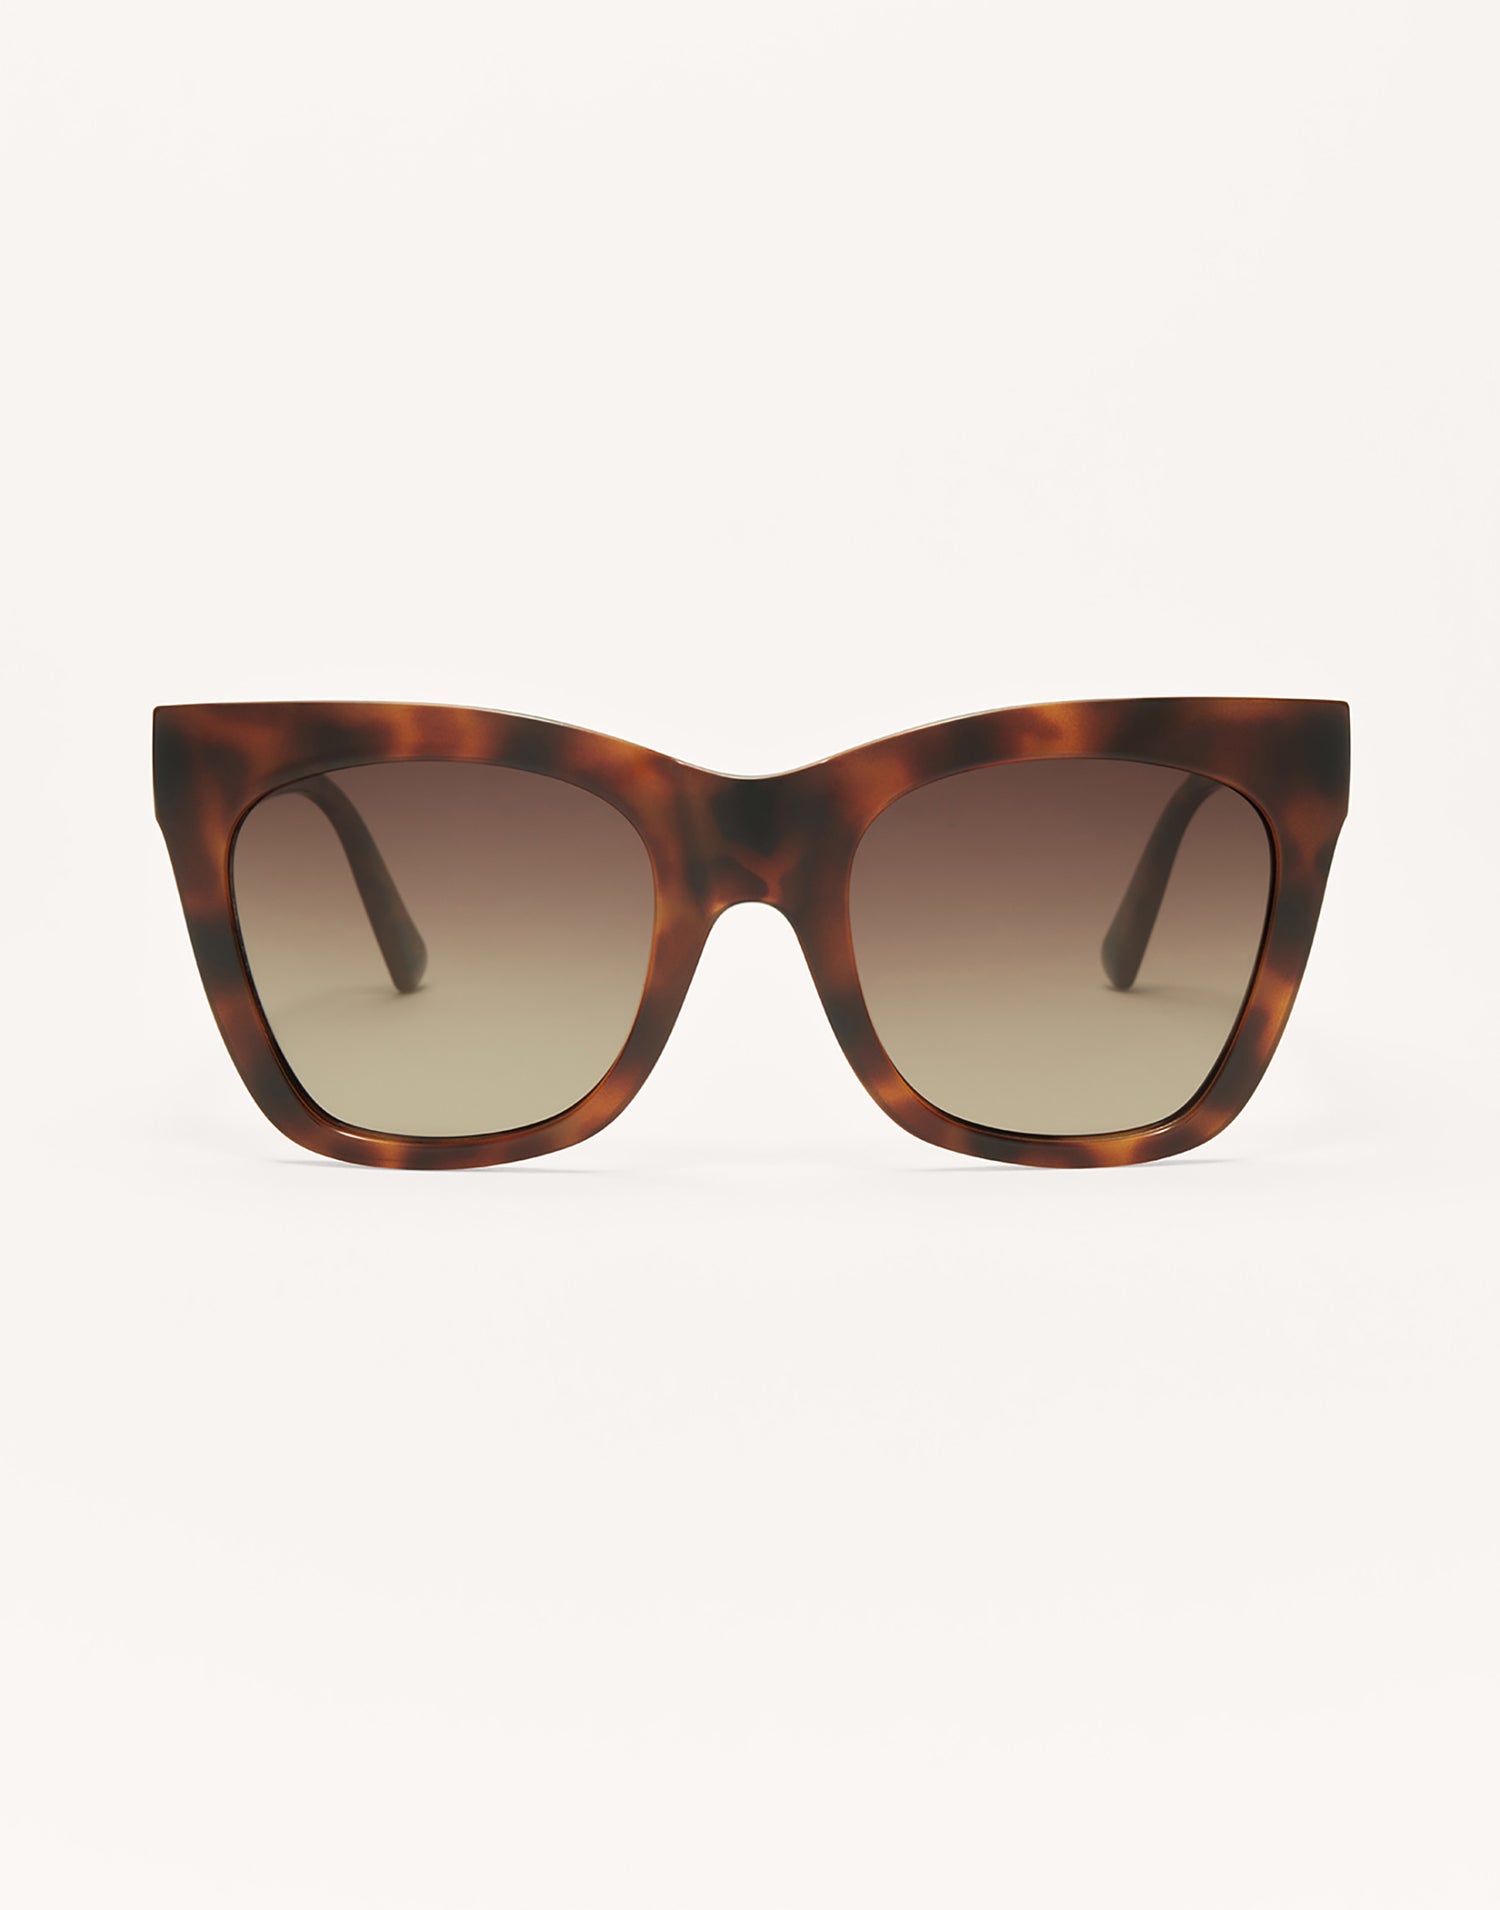 Everyday Sunglasses by Z Supply in Brown Tortoise - Front View